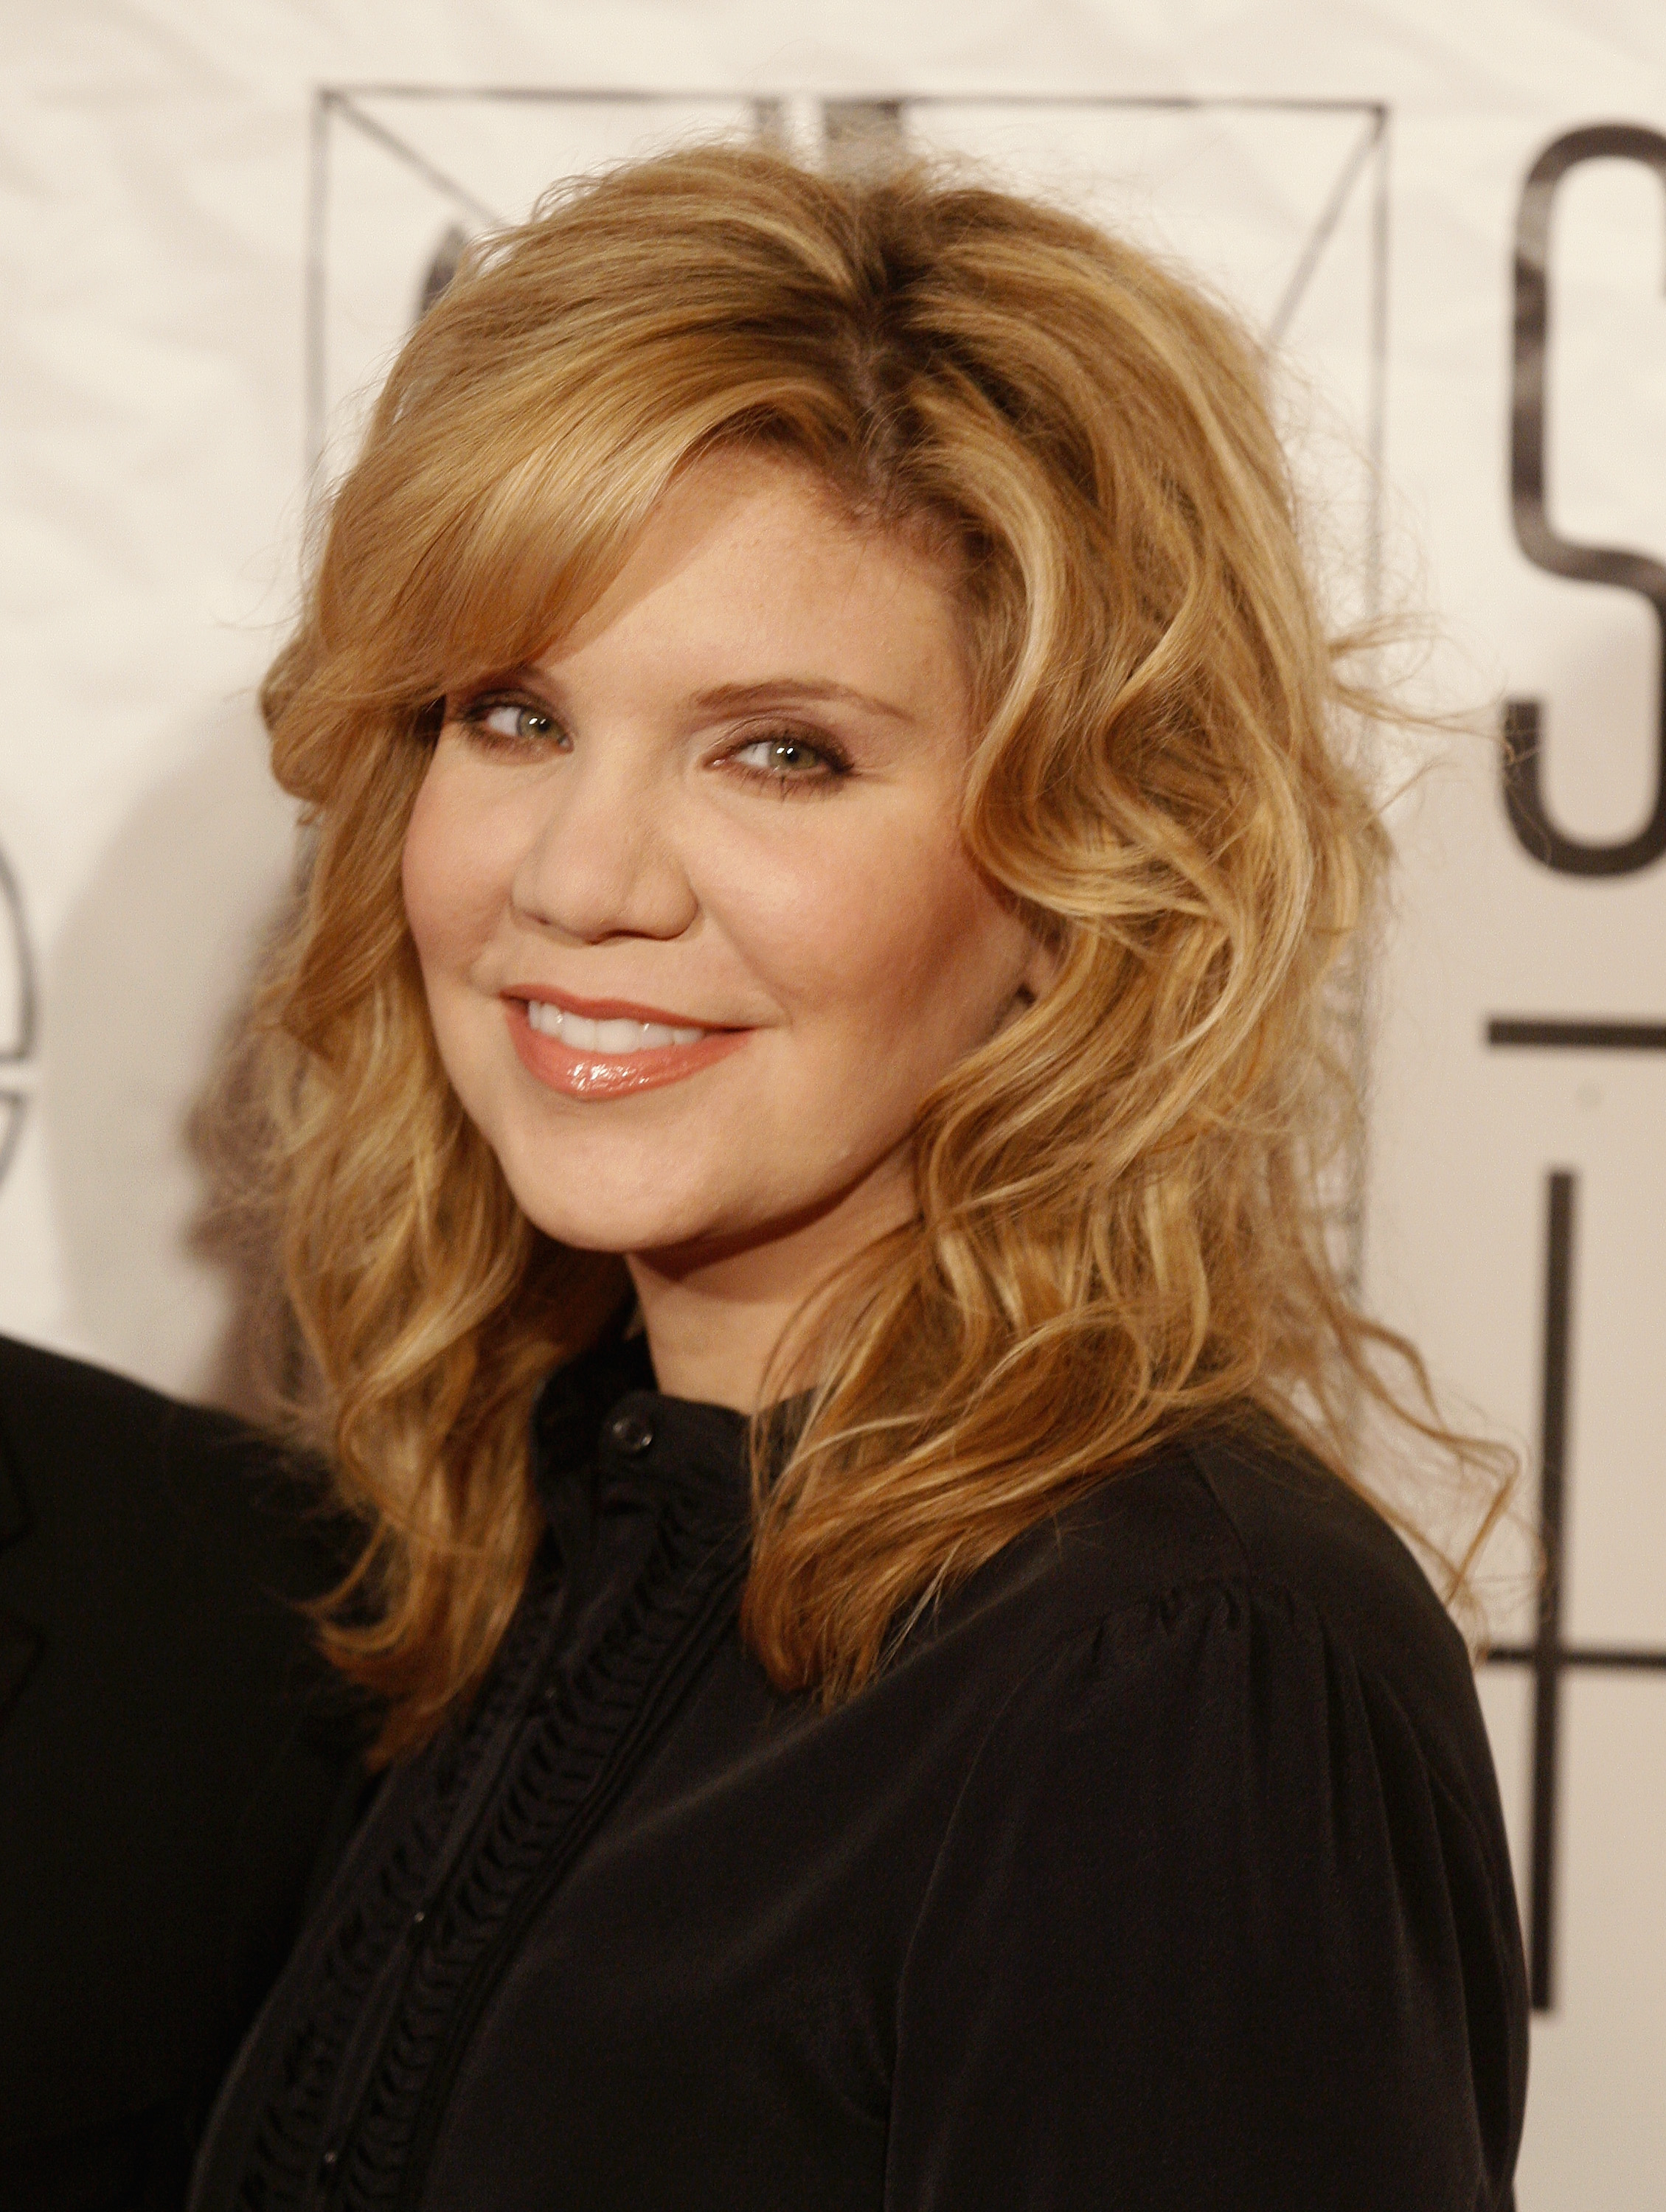 Alison Krauss Reveals Struggles After Life-Changing Diagnosis.